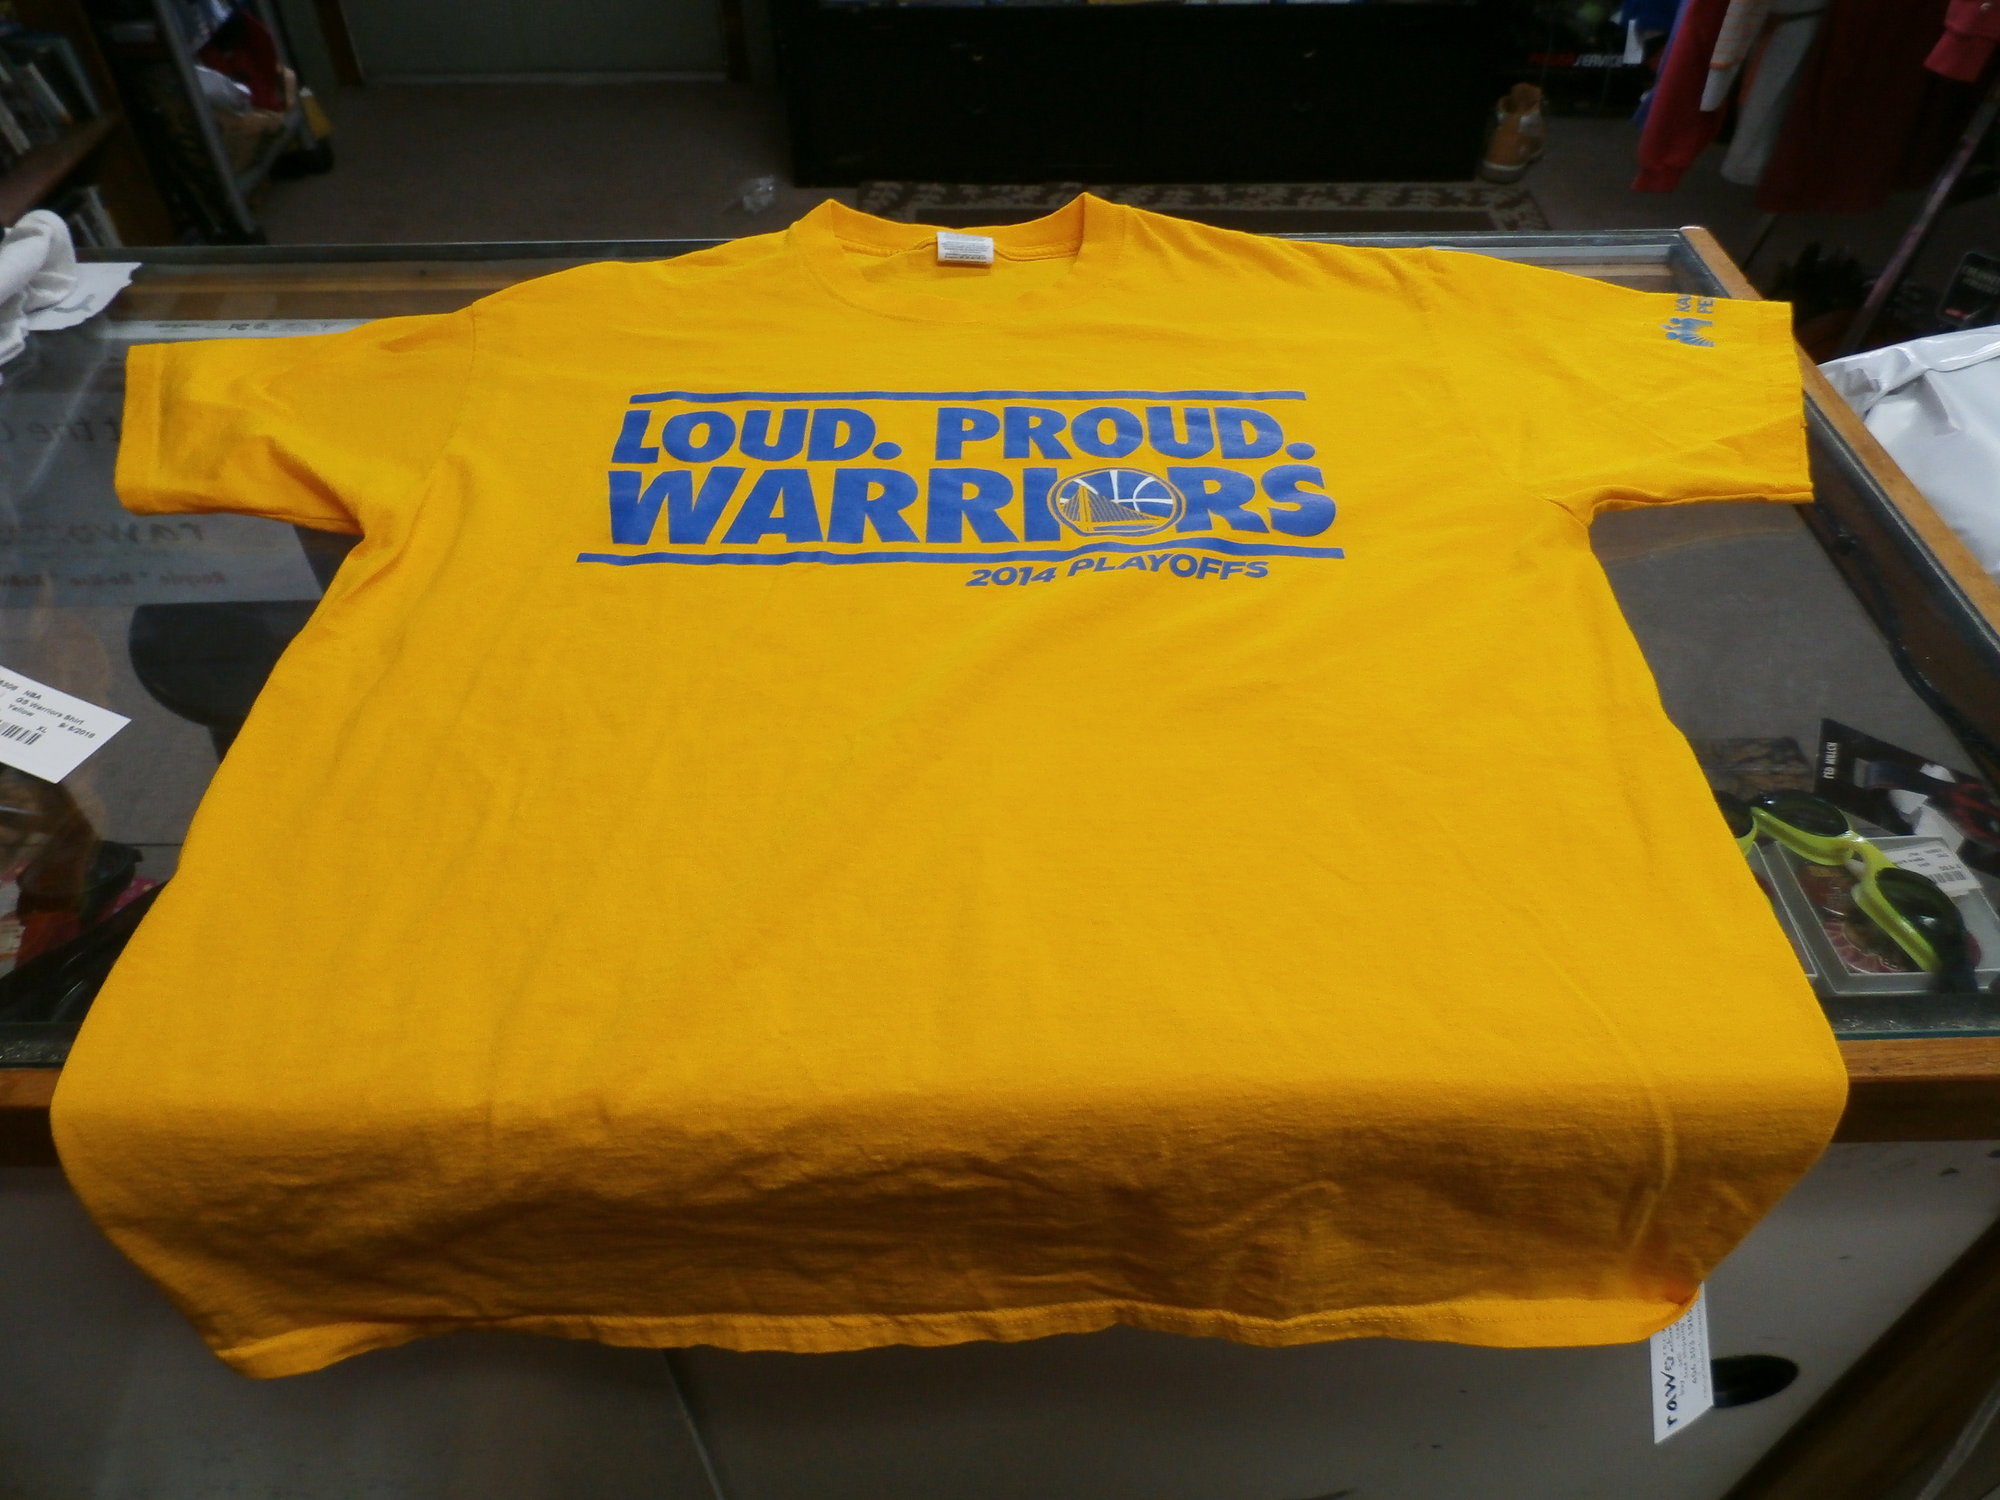 Golden State Warriors \"Loud Proud\" Shirt Yellow Jerzees size XL 100 cotton #25309
Rating: (see below) 3- Good Condition
Team: Golden State Warriors
Event: Playoffs
Brand: Jerzees
Size: Men's- XL (Measured: Across chest 22\", length 29\")
Measured: Armpit to armpit; shoulder to hem
Color: Yellow
Style: short sleeve; screen pressed
Material: 100% Cotton
Condition: -3 Good Condition - wrinkled, minor pilling and fuzz; slight fading; stretched out from use; feels a little course; discolored slightly; bottom is curled up
Item #: 25309
Shipping: FREE